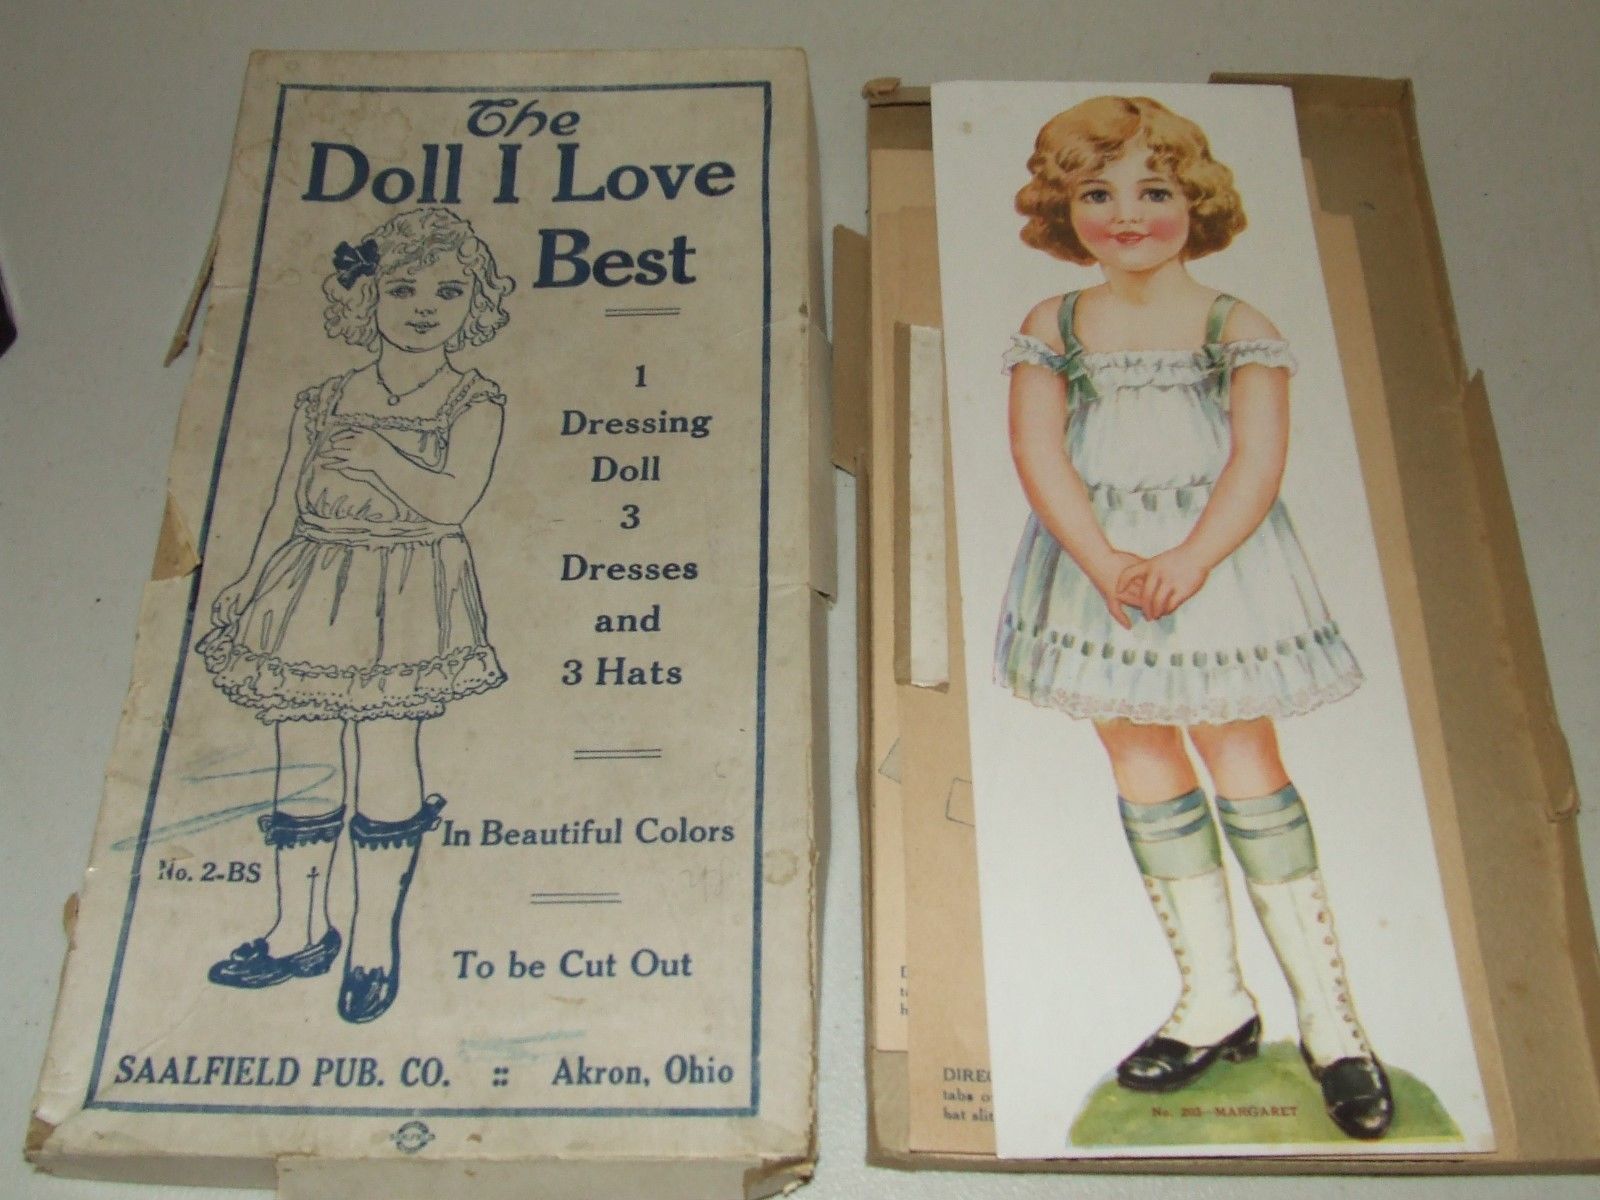 Antique 1910 Saalfield "The Doll I Love Best" Uncut Paper Doll with Original Box